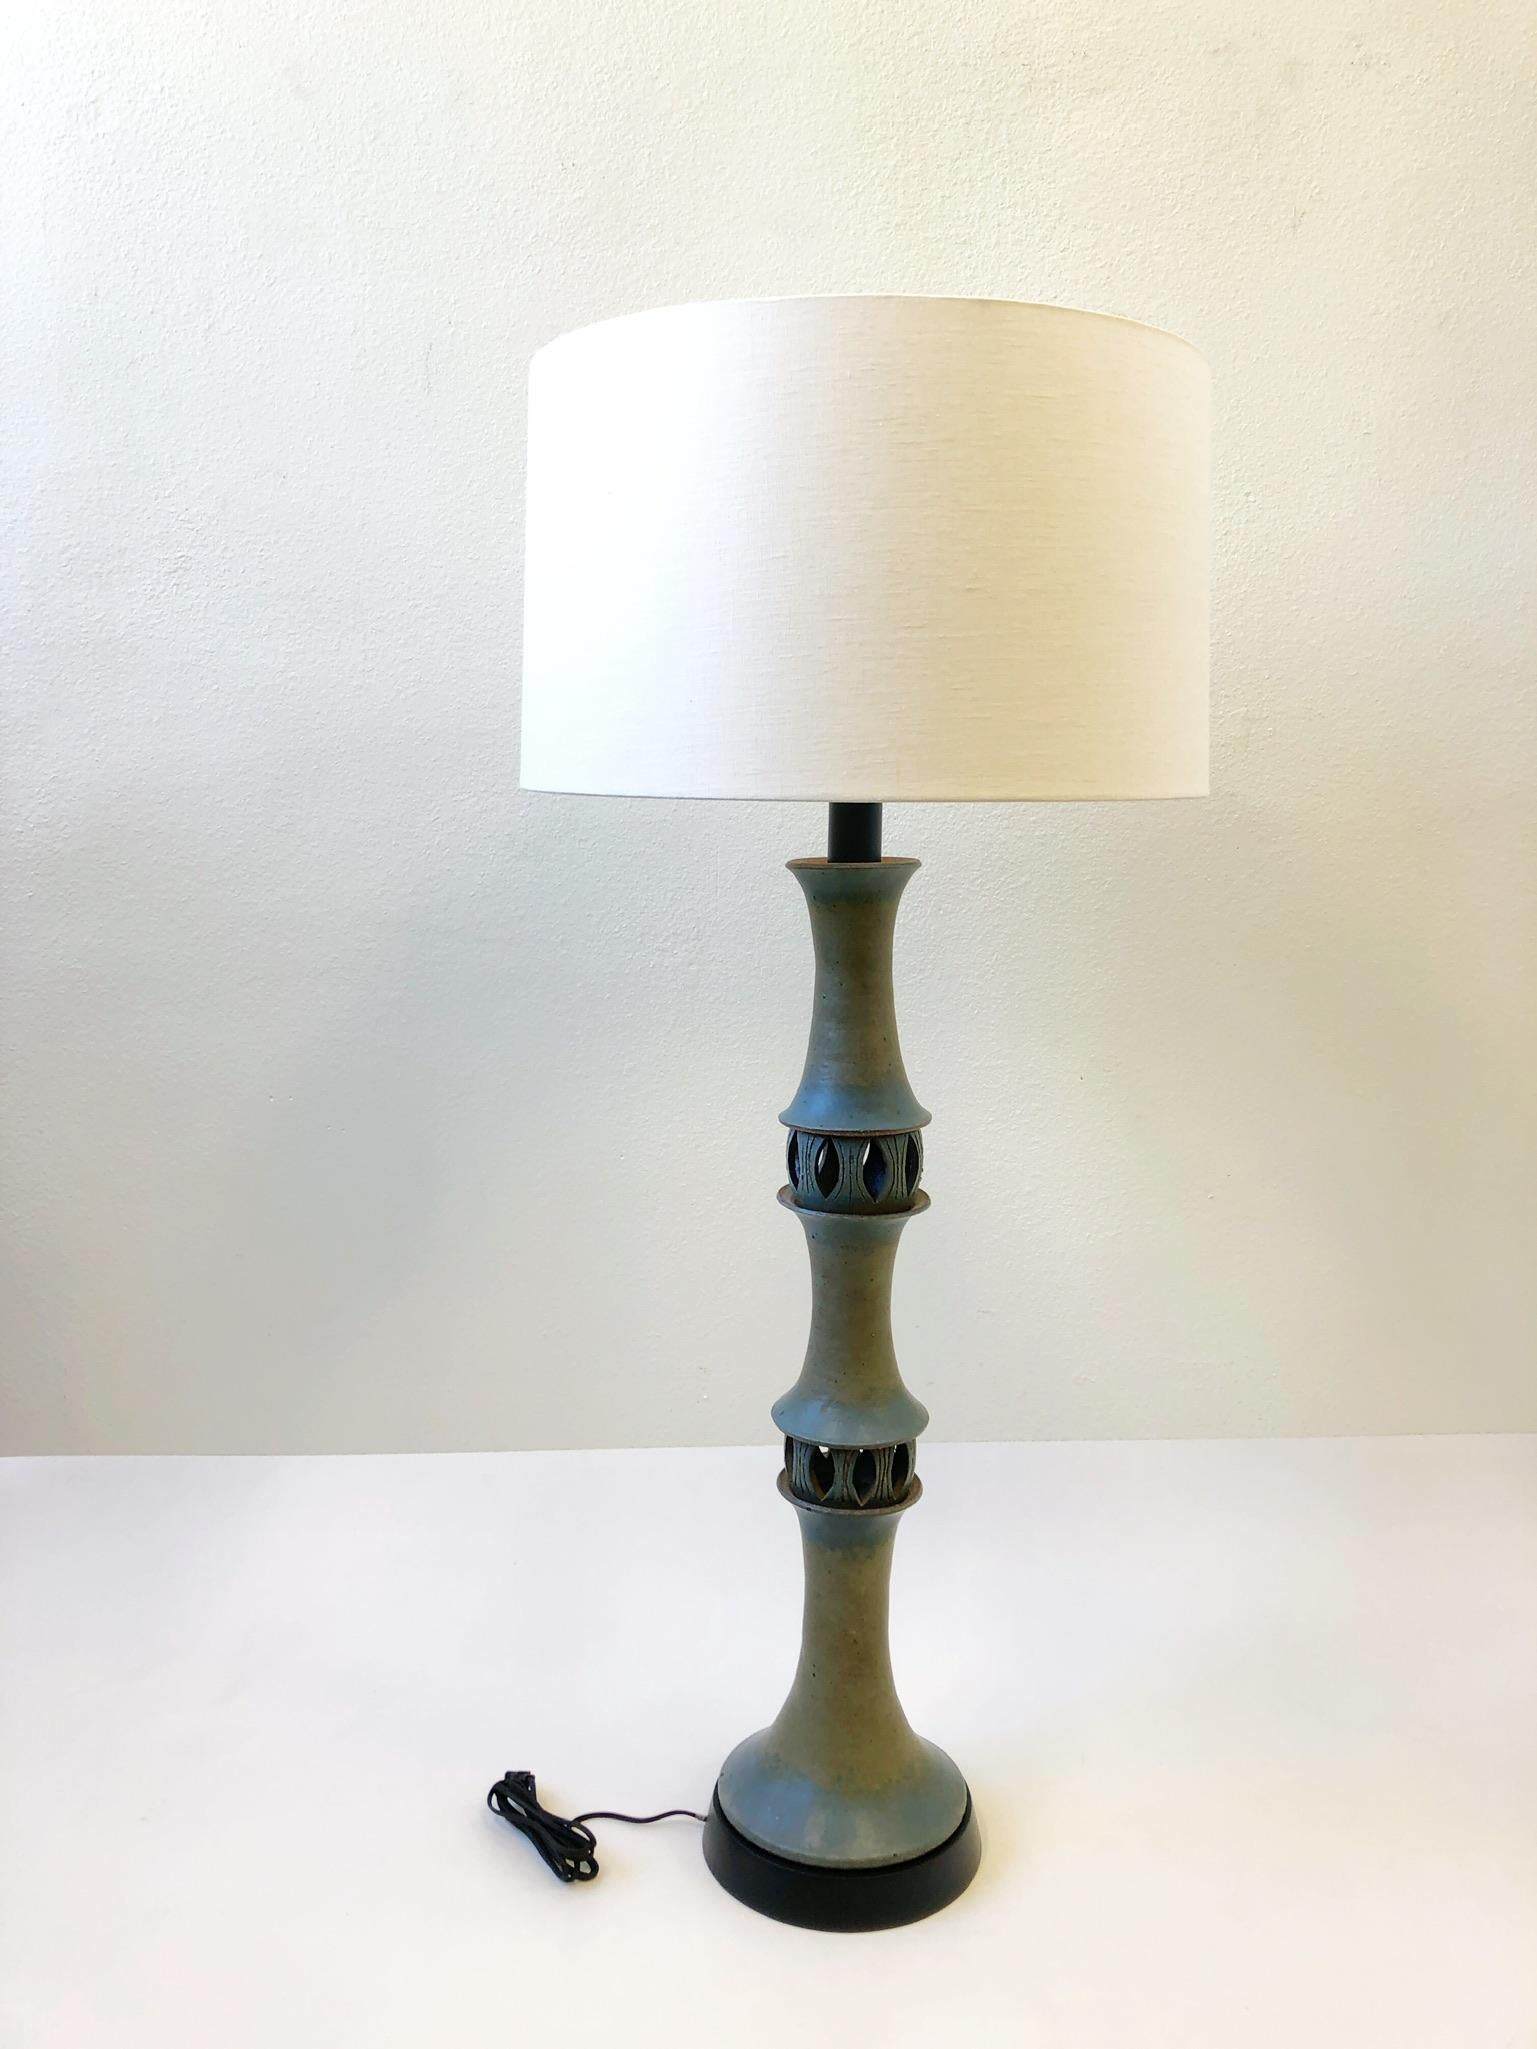 A spectacular studio ceramic floor lamp by renowned ceramics Raul Coronel. The lamp is constructed of ceramic sections, black lacquer wood, newl polish nickel hardware and new vanilla linen shade. 
Dimensions: 54.5” high 24” diameter 11” diameter